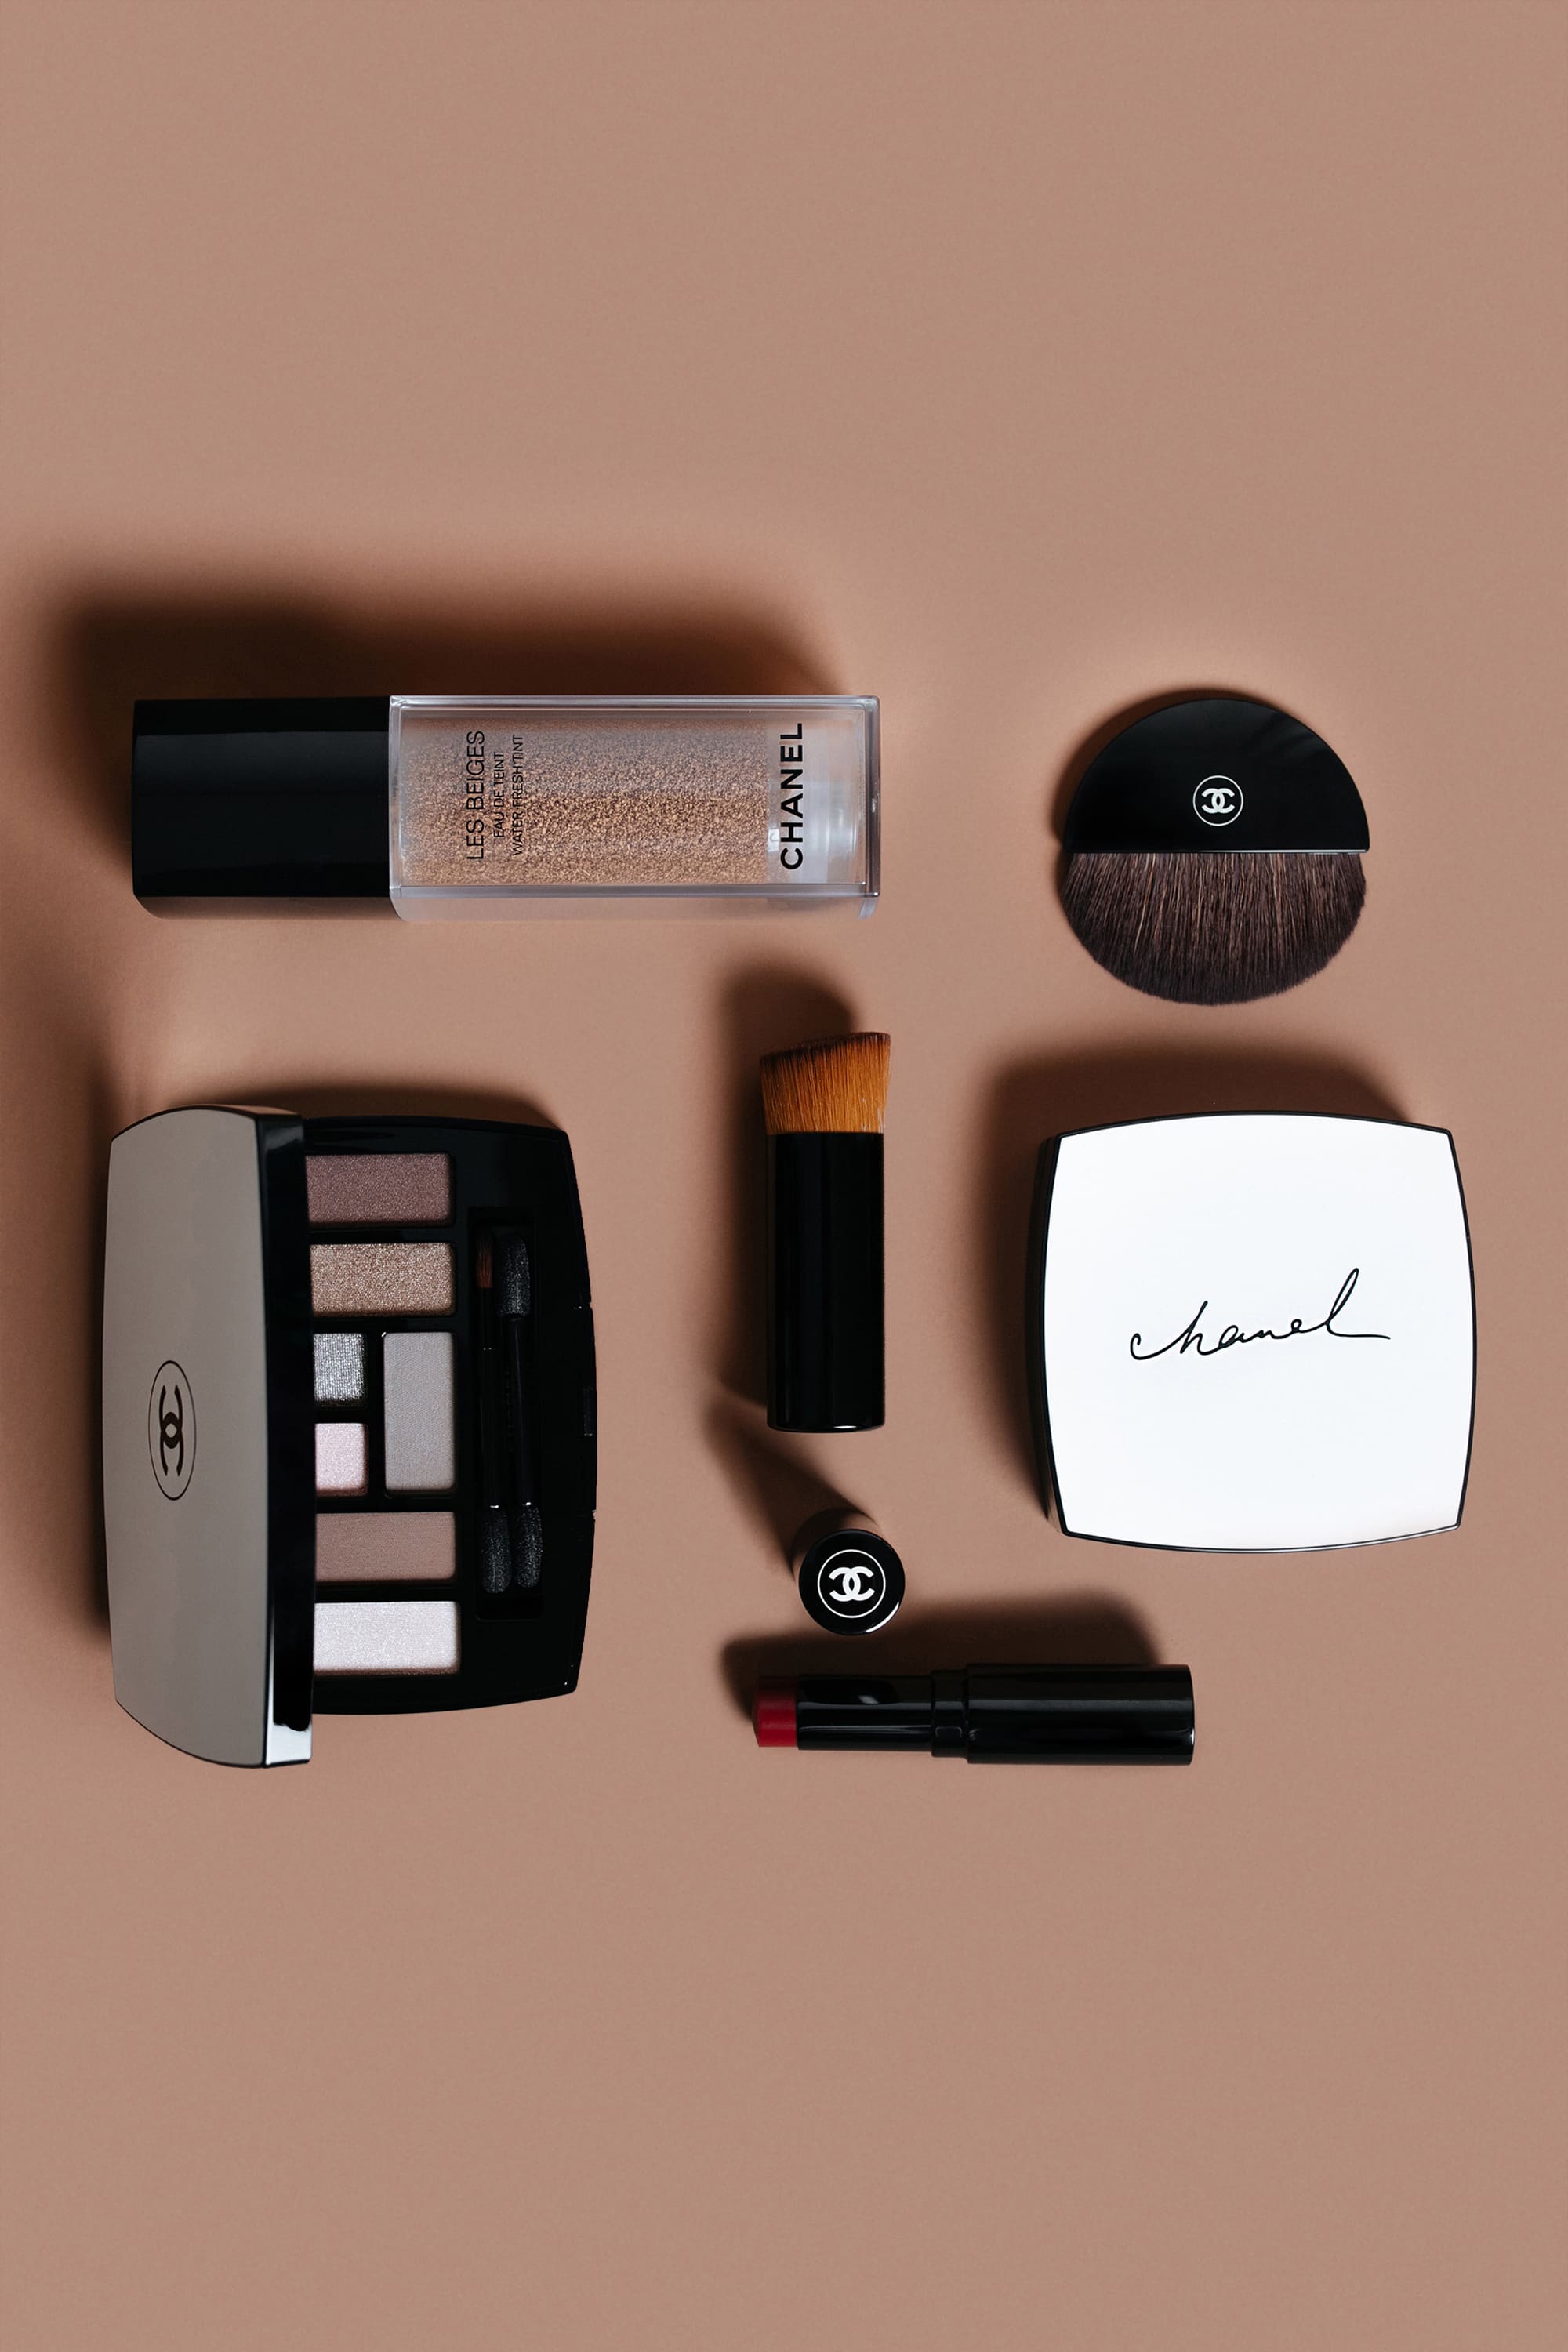 Chanel takes no-makeup makeup to the next level